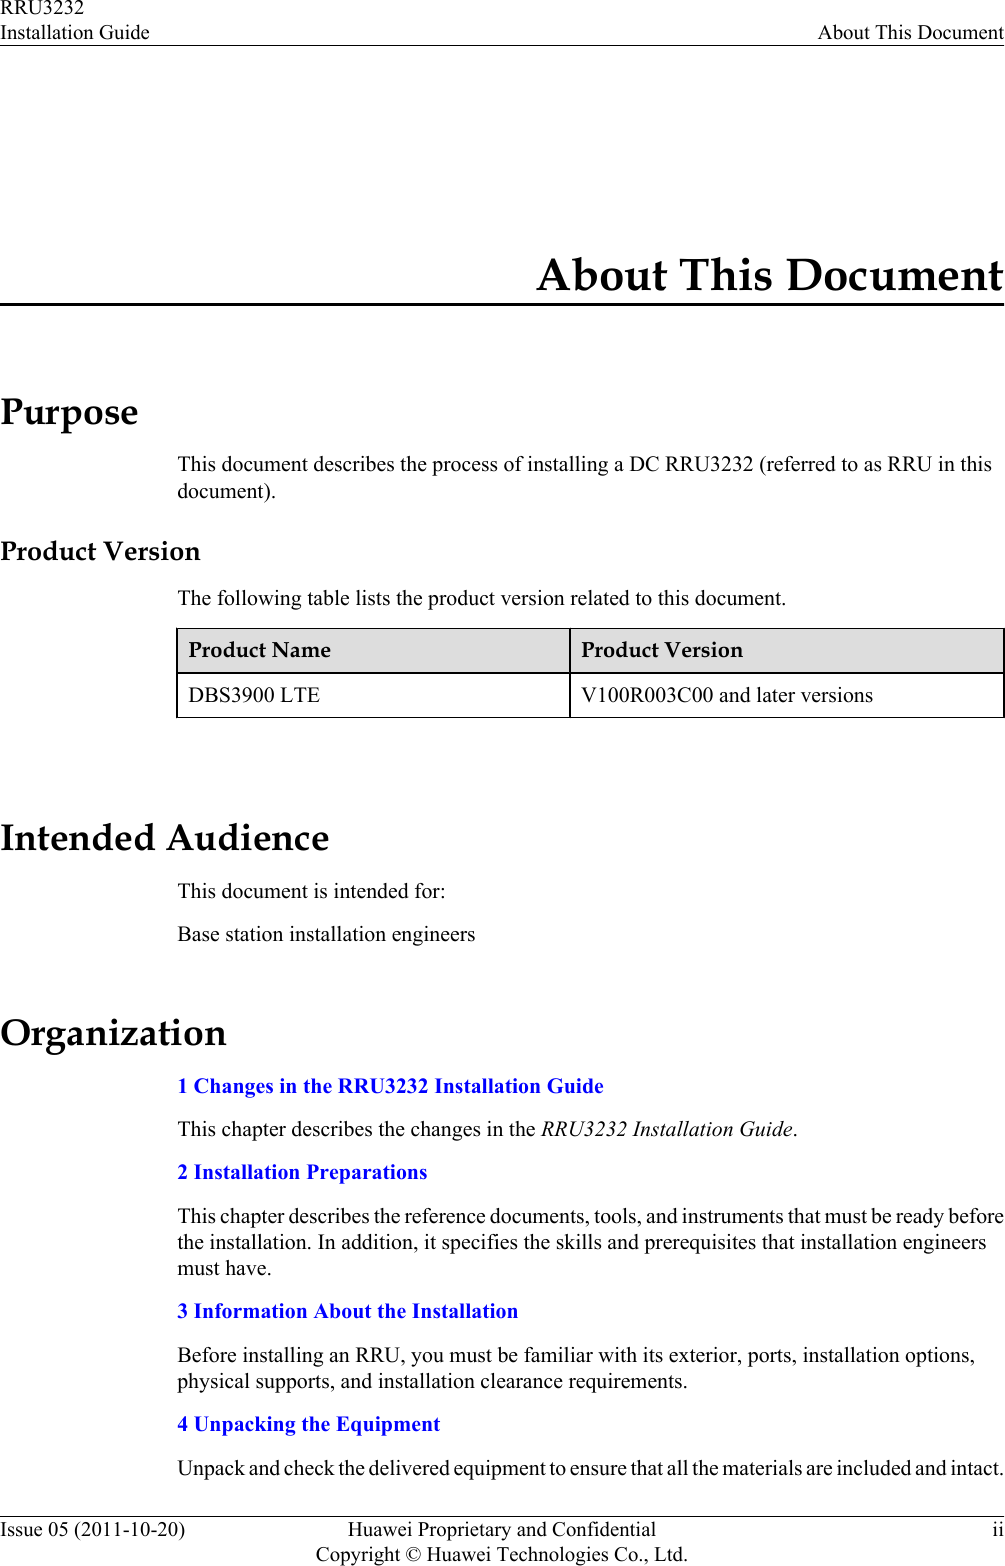 About This DocumentPurposeThis document describes the process of installing a DC RRU3232 (referred to as RRU in thisdocument).Product VersionThe following table lists the product version related to this document.Product Name Product VersionDBS3900 LTE V100R003C00 and later versions Intended AudienceThis document is intended for:Base station installation engineersOrganization1 Changes in the RRU3232 Installation GuideThis chapter describes the changes in the RRU3232 Installation Guide.2 Installation PreparationsThis chapter describes the reference documents, tools, and instruments that must be ready beforethe installation. In addition, it specifies the skills and prerequisites that installation engineersmust have.3 Information About the InstallationBefore installing an RRU, you must be familiar with its exterior, ports, installation options,physical supports, and installation clearance requirements.4 Unpacking the EquipmentUnpack and check the delivered equipment to ensure that all the materials are included and intact.RRU3232Installation Guide About This DocumentIssue 05 (2011-10-20) Huawei Proprietary and ConfidentialCopyright © Huawei Technologies Co., Ltd.ii